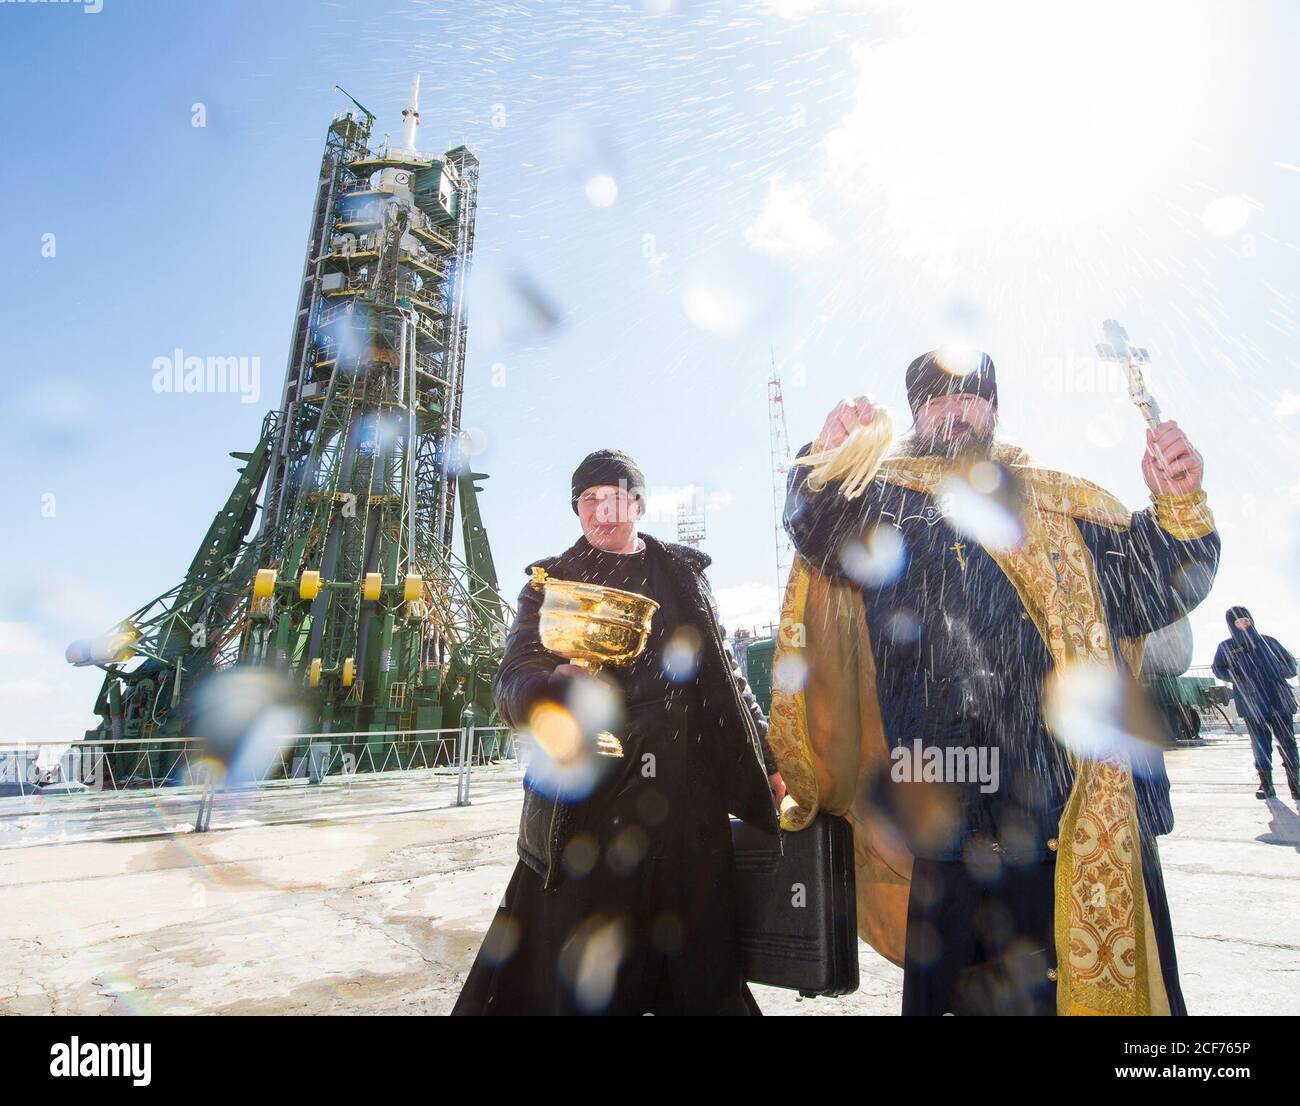 An Orthodox priest blesses members of the media at the Baikonur Cosmodrome launch pad on Thursday, March 17, 2016 in Kazakhstan.  Launch of the Soyuz rocket is scheduled for March 19 Baikonur time and will carry Expedition 47 Soyuz Commander Alexey Ovchinin of Roscosmos, Flight Engineer Jeff Williams of NASA, and Flight Engineer Oleg Skripochka of Roscosmos into orbit to begin their five and a half month mission on the International Space Station. Photo Credit: (NASA/Aubrey Gemignani) Stock Photo